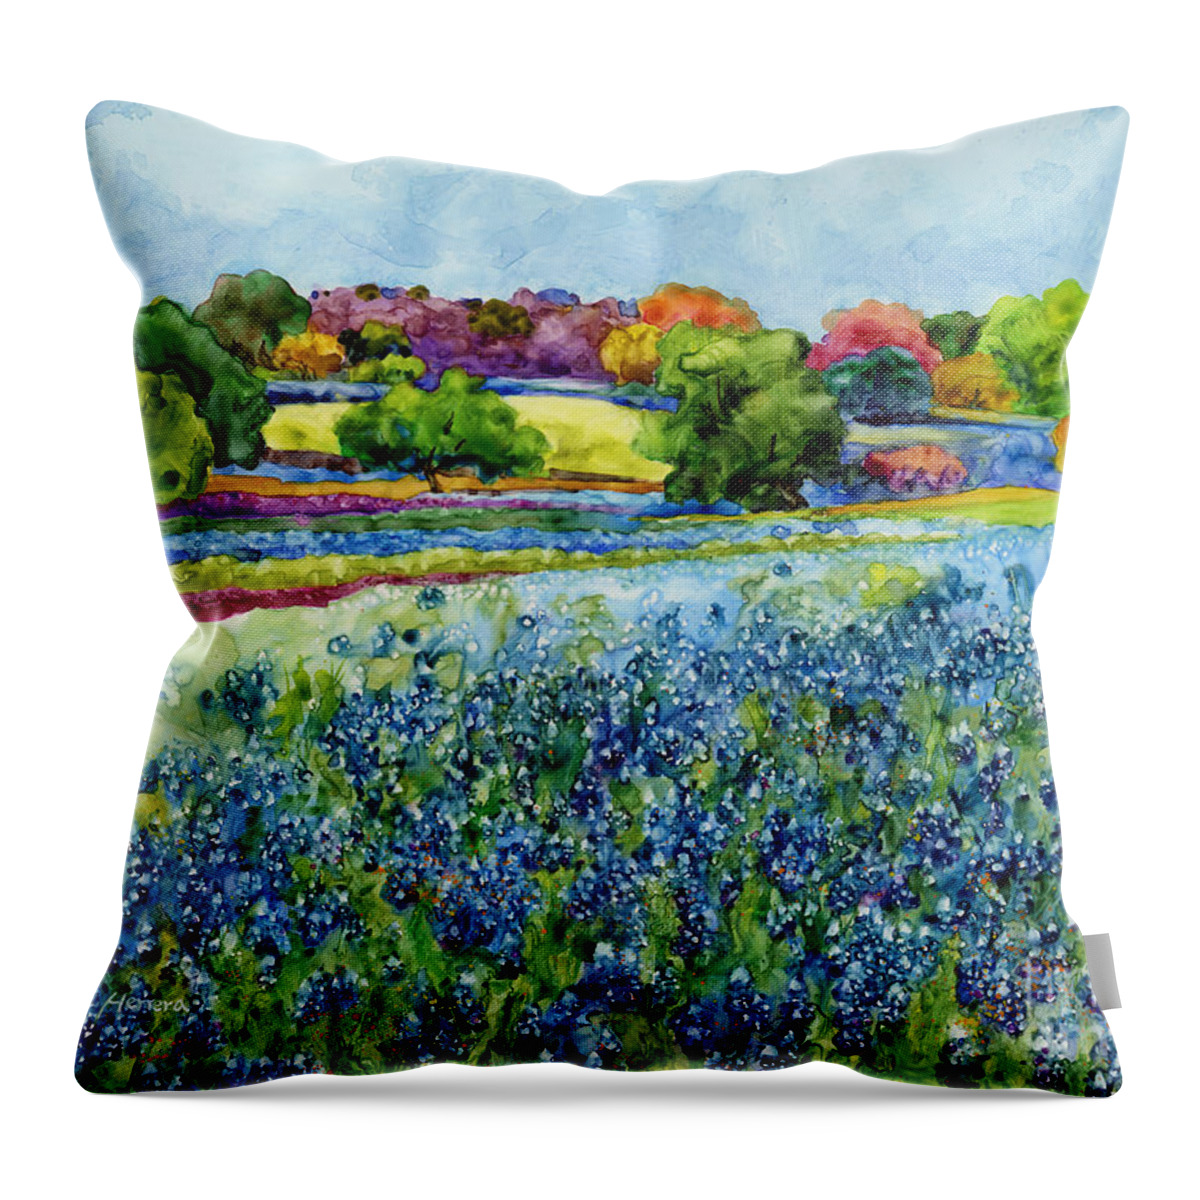 Bluebonnet Throw Pillow featuring the painting Spring Impressions by Hailey E Herrera